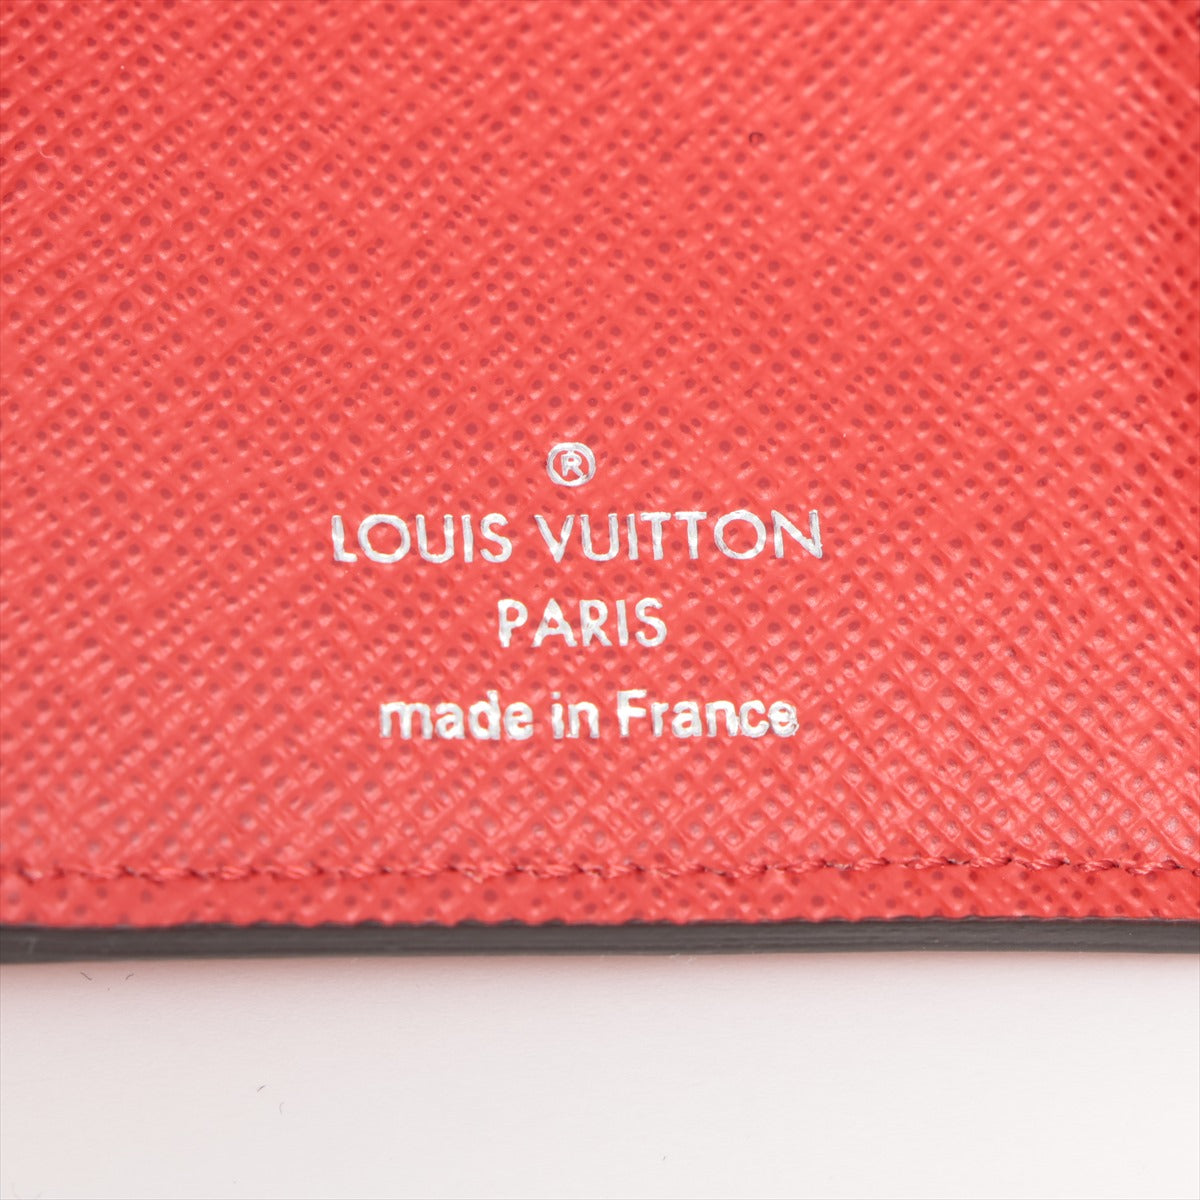 Louis Vuitton x Spring Epi Chain Compact Wallet M67755 Leather x Metal Compact Wallet Red SN2127